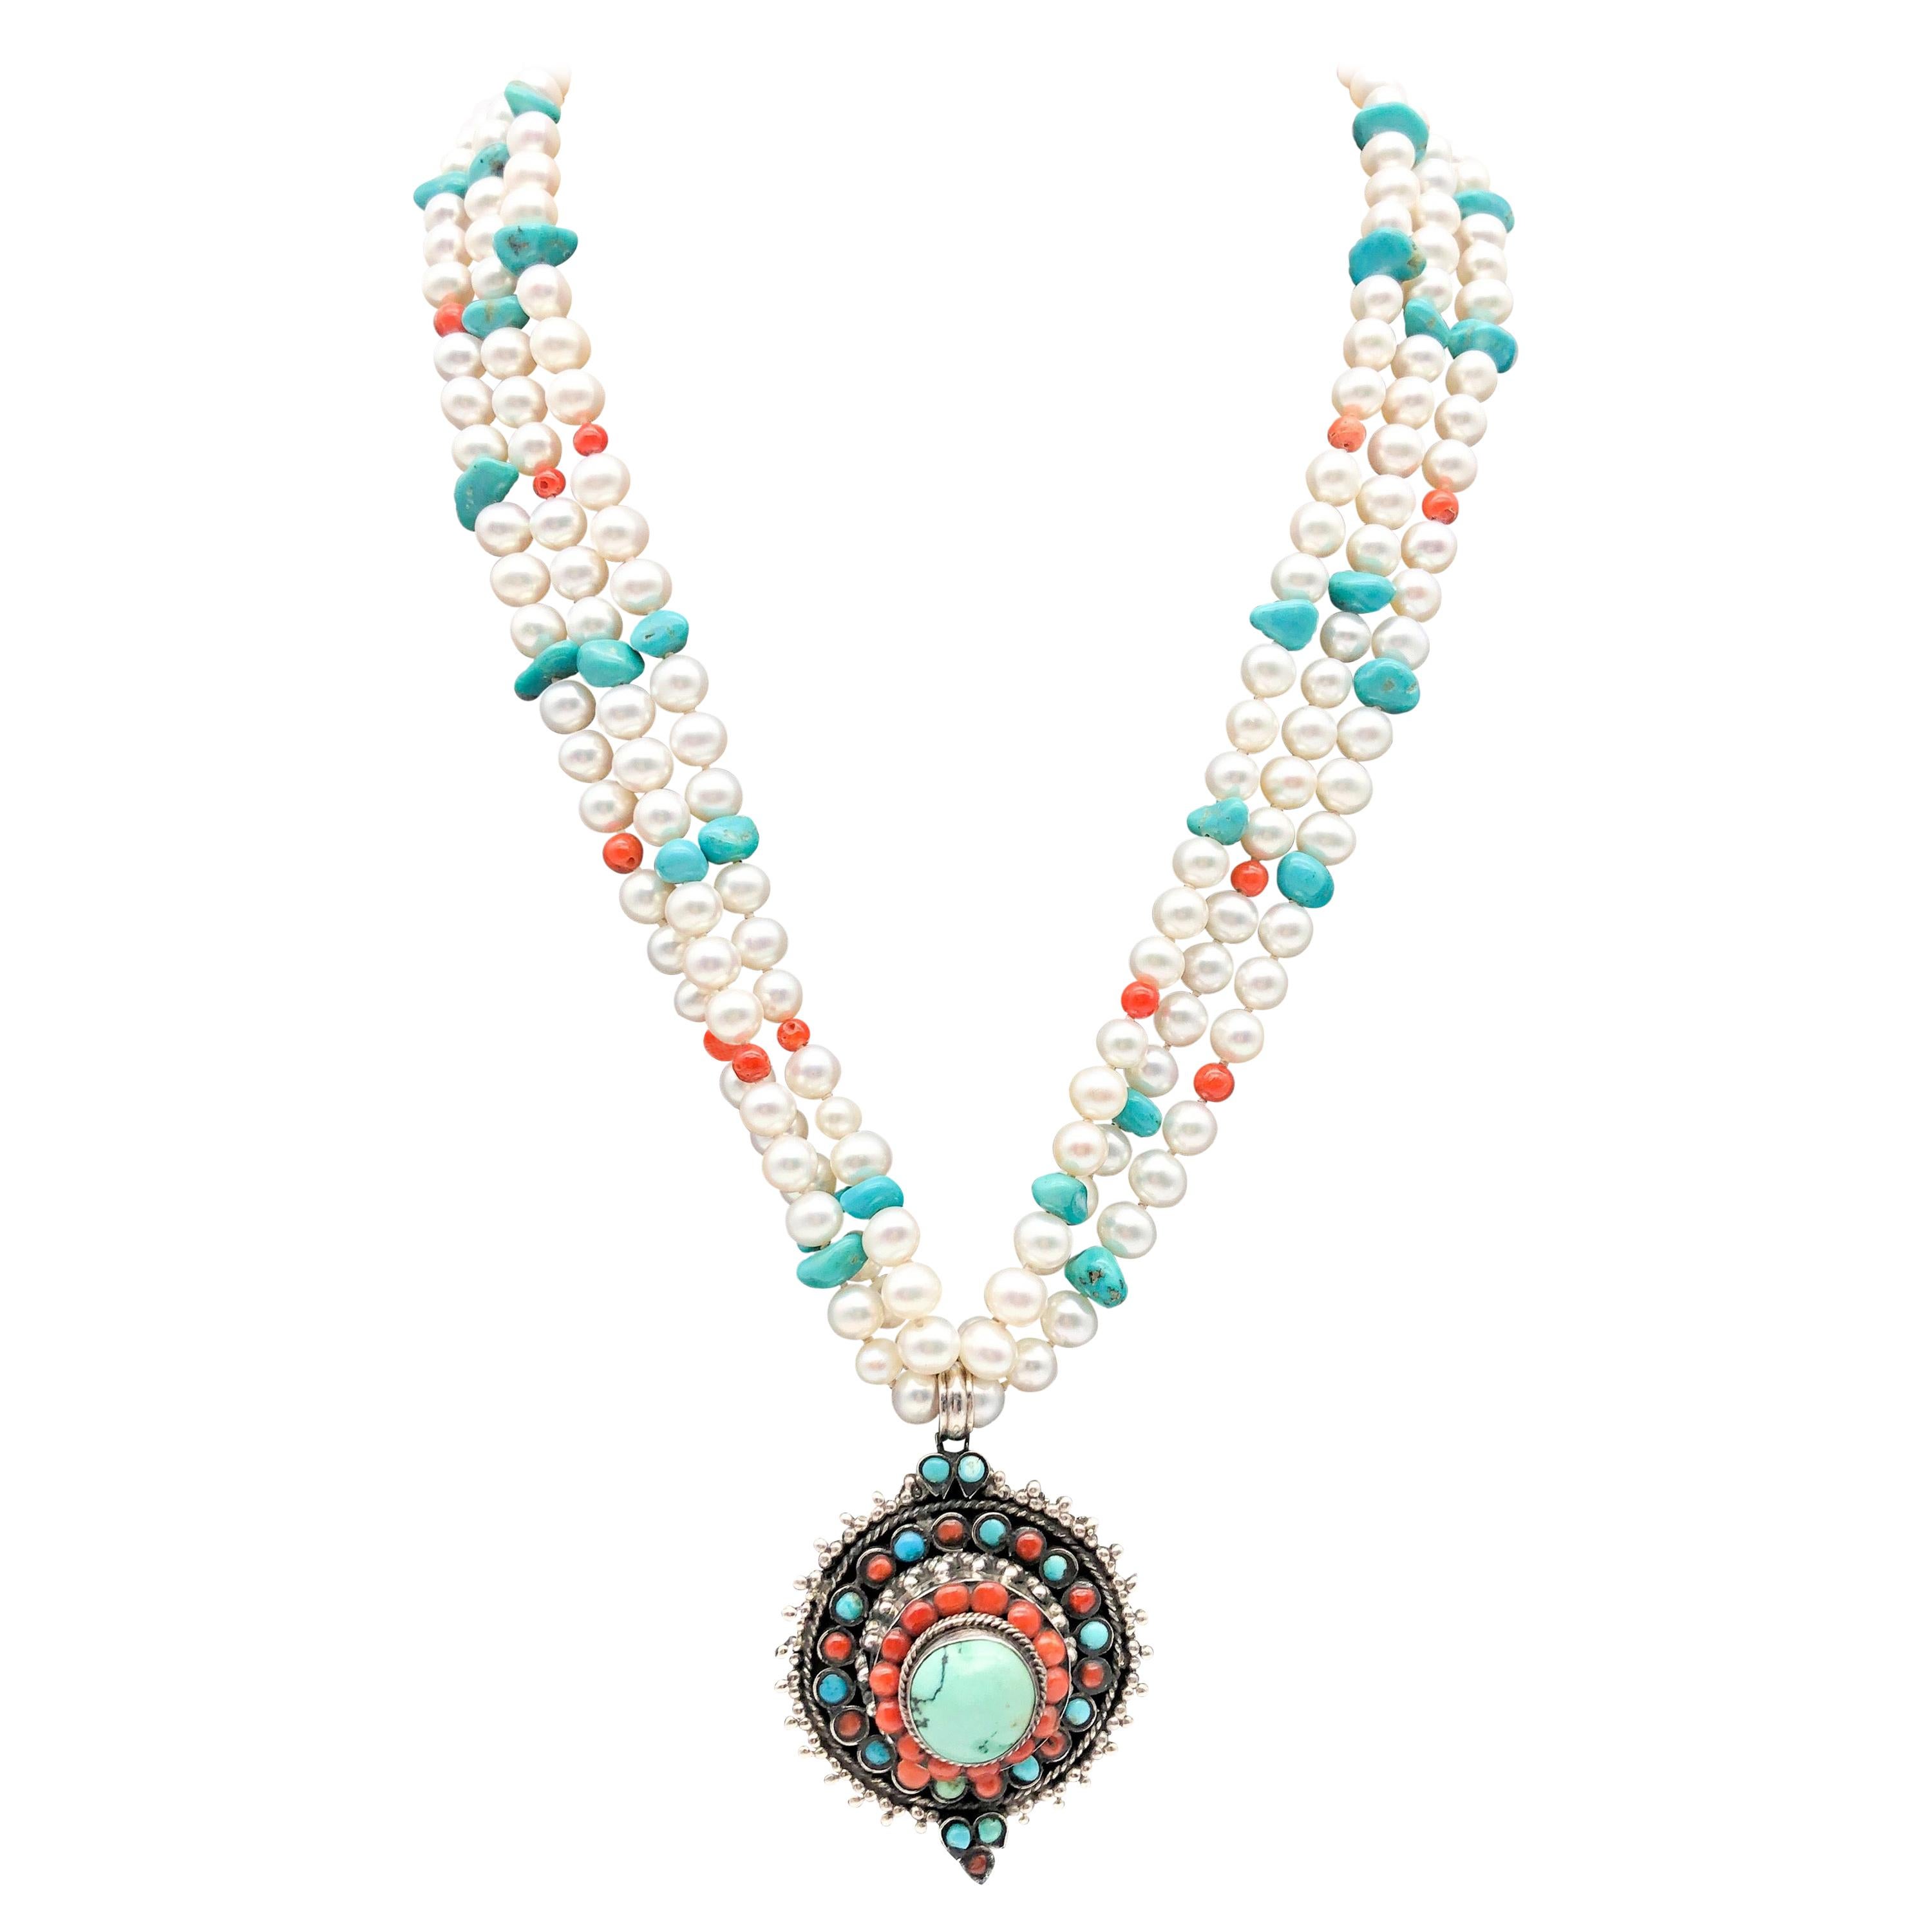 A.Jeschel Freshwater Pearls with Vintage Tibetan Turquoise pendant